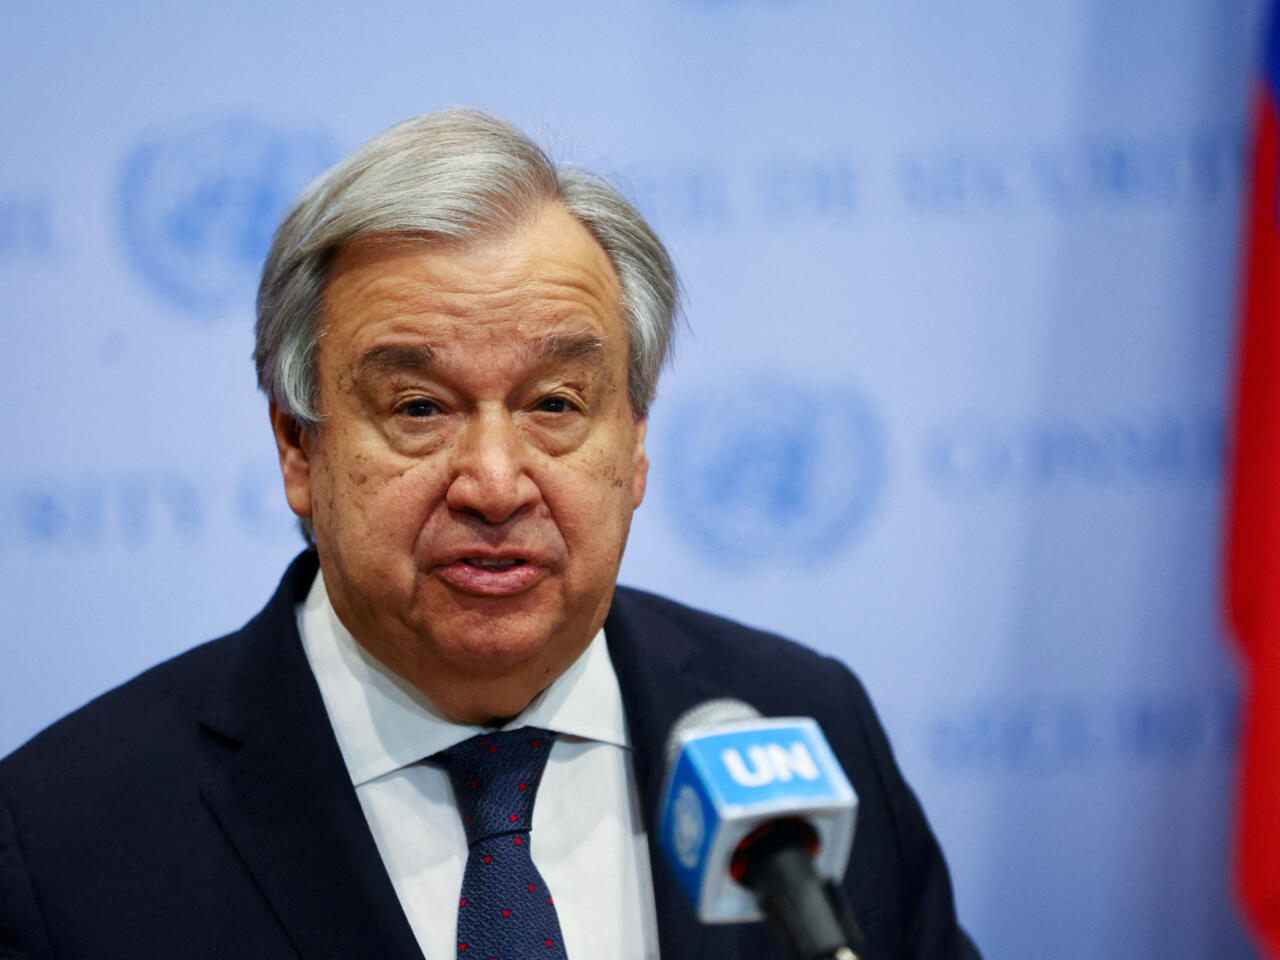 UN chief warns against ground invasion of Rafah amid escalating tensions in Gaza